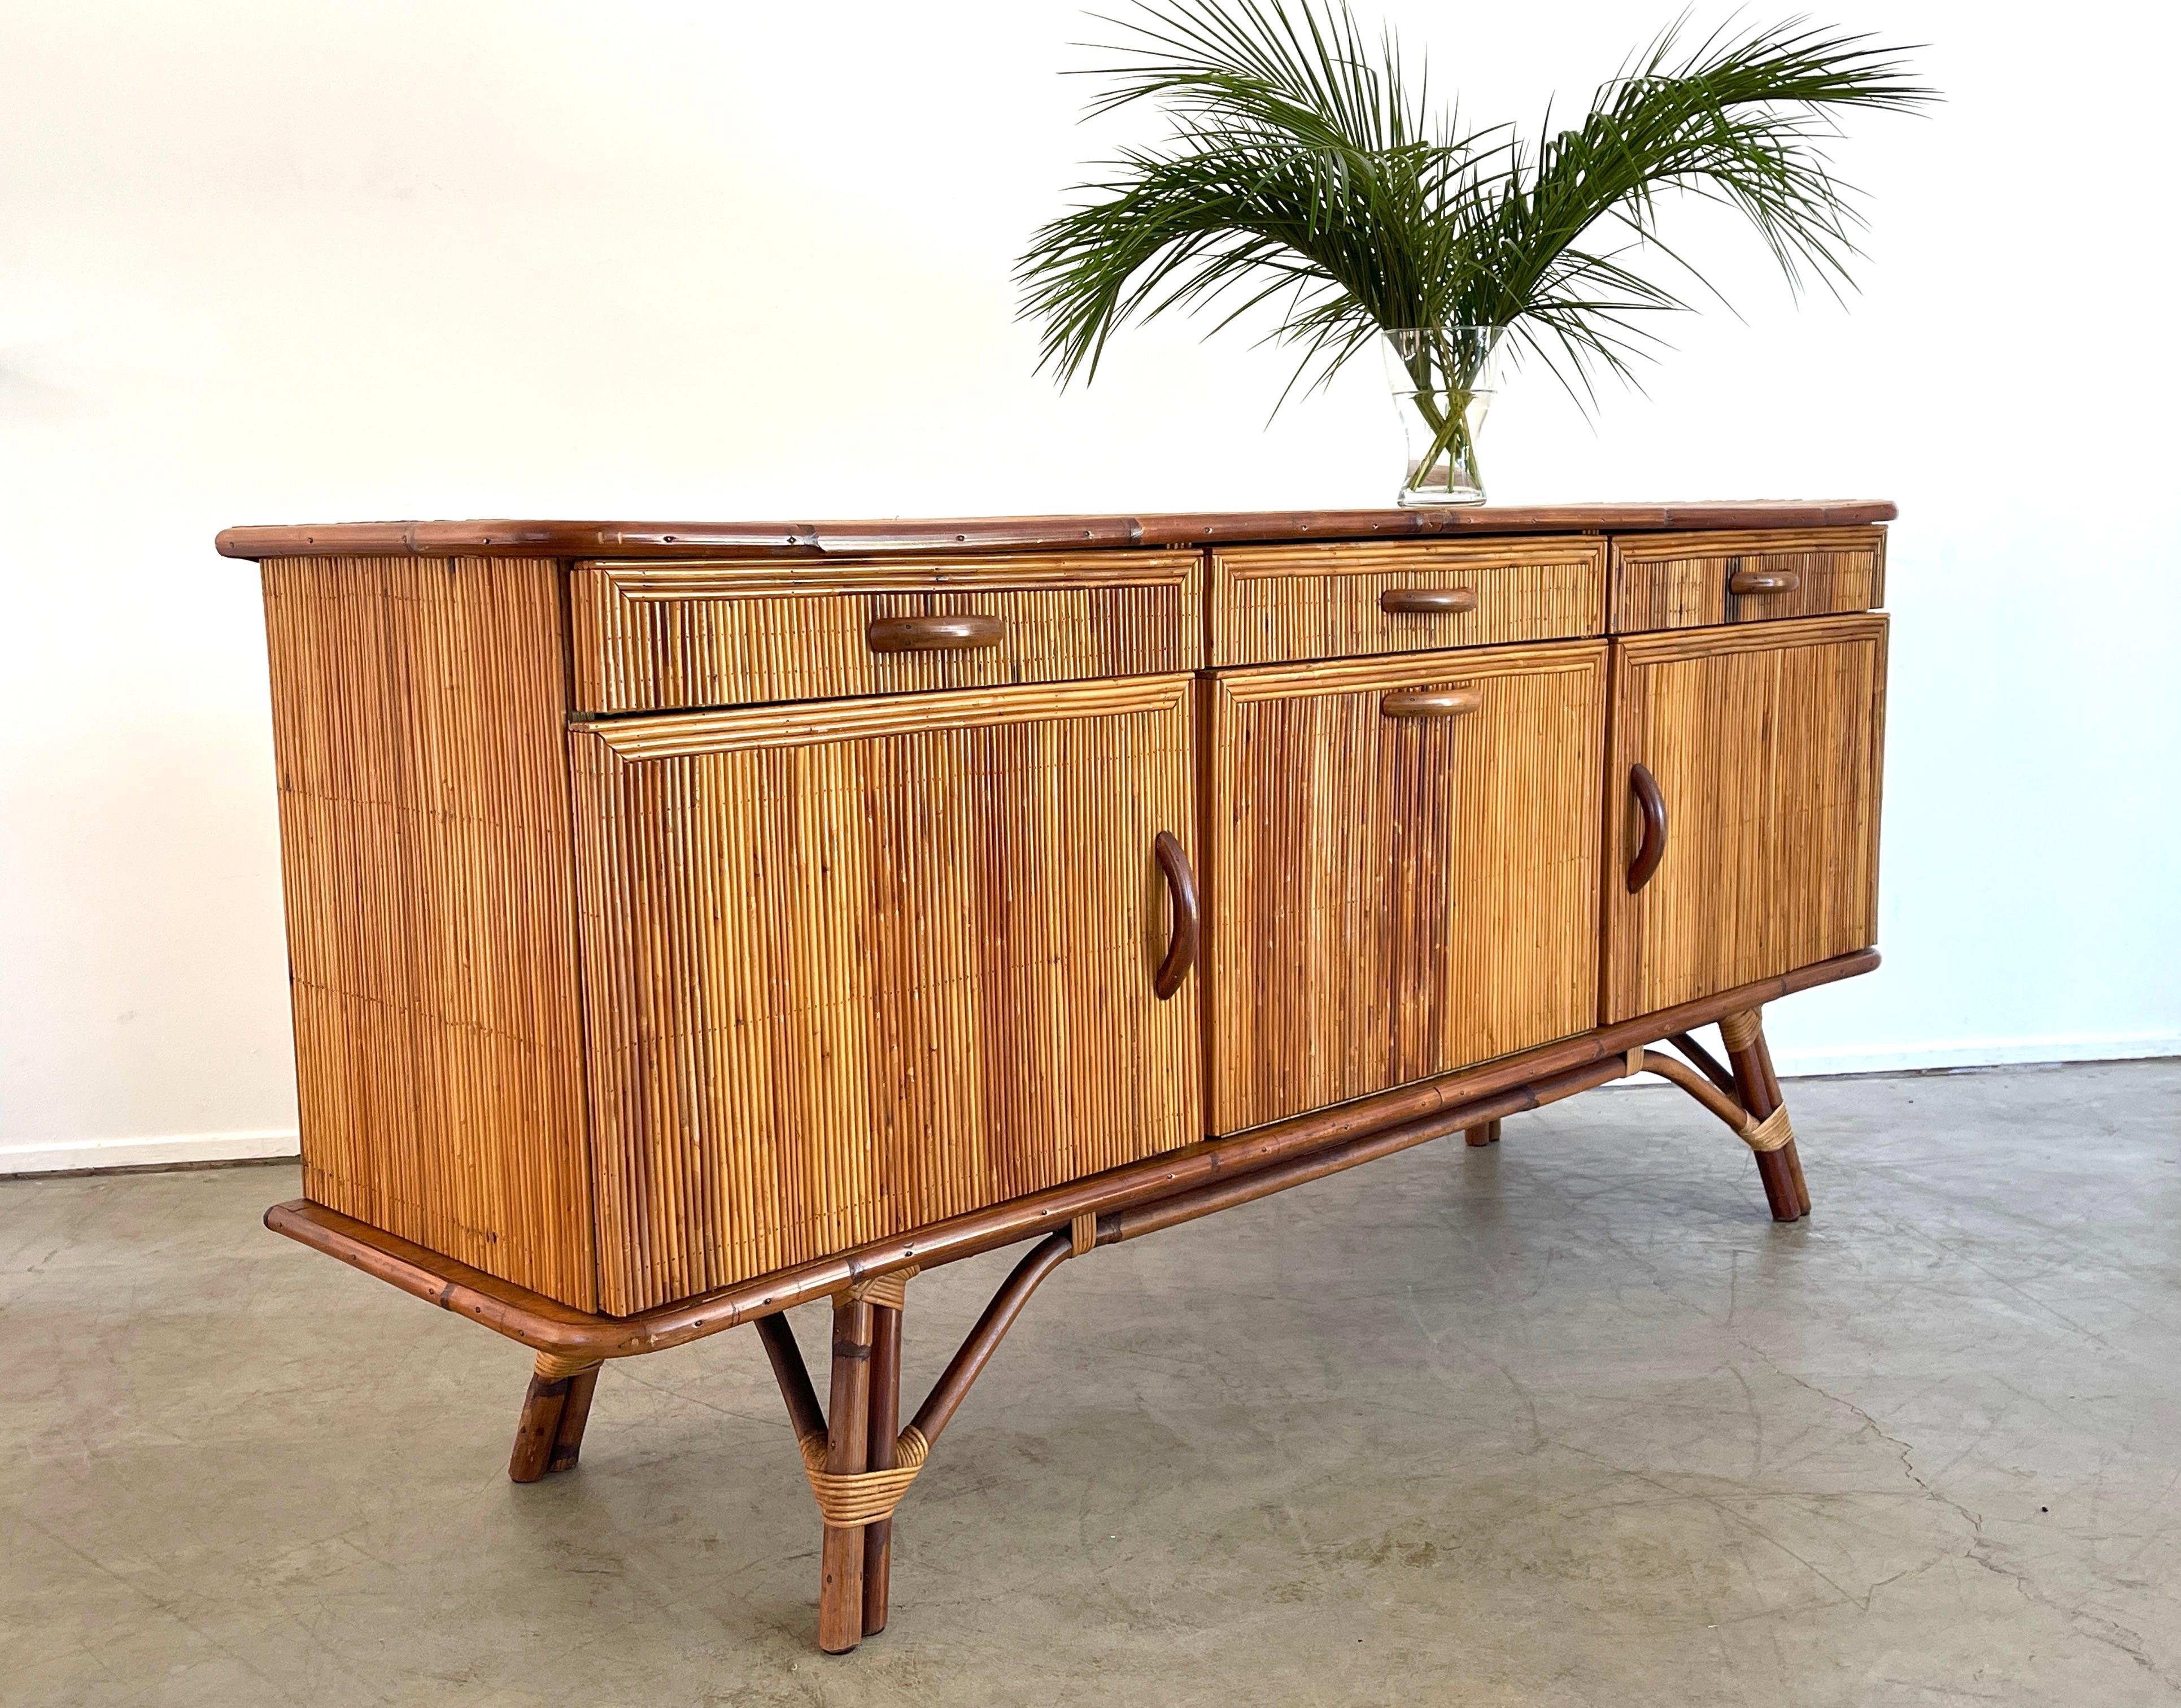 Beautiful bamboo sideboard by Audoux Minet with pencil reed bamboo throughout and wood handles. 
Sophisticated and chic design.